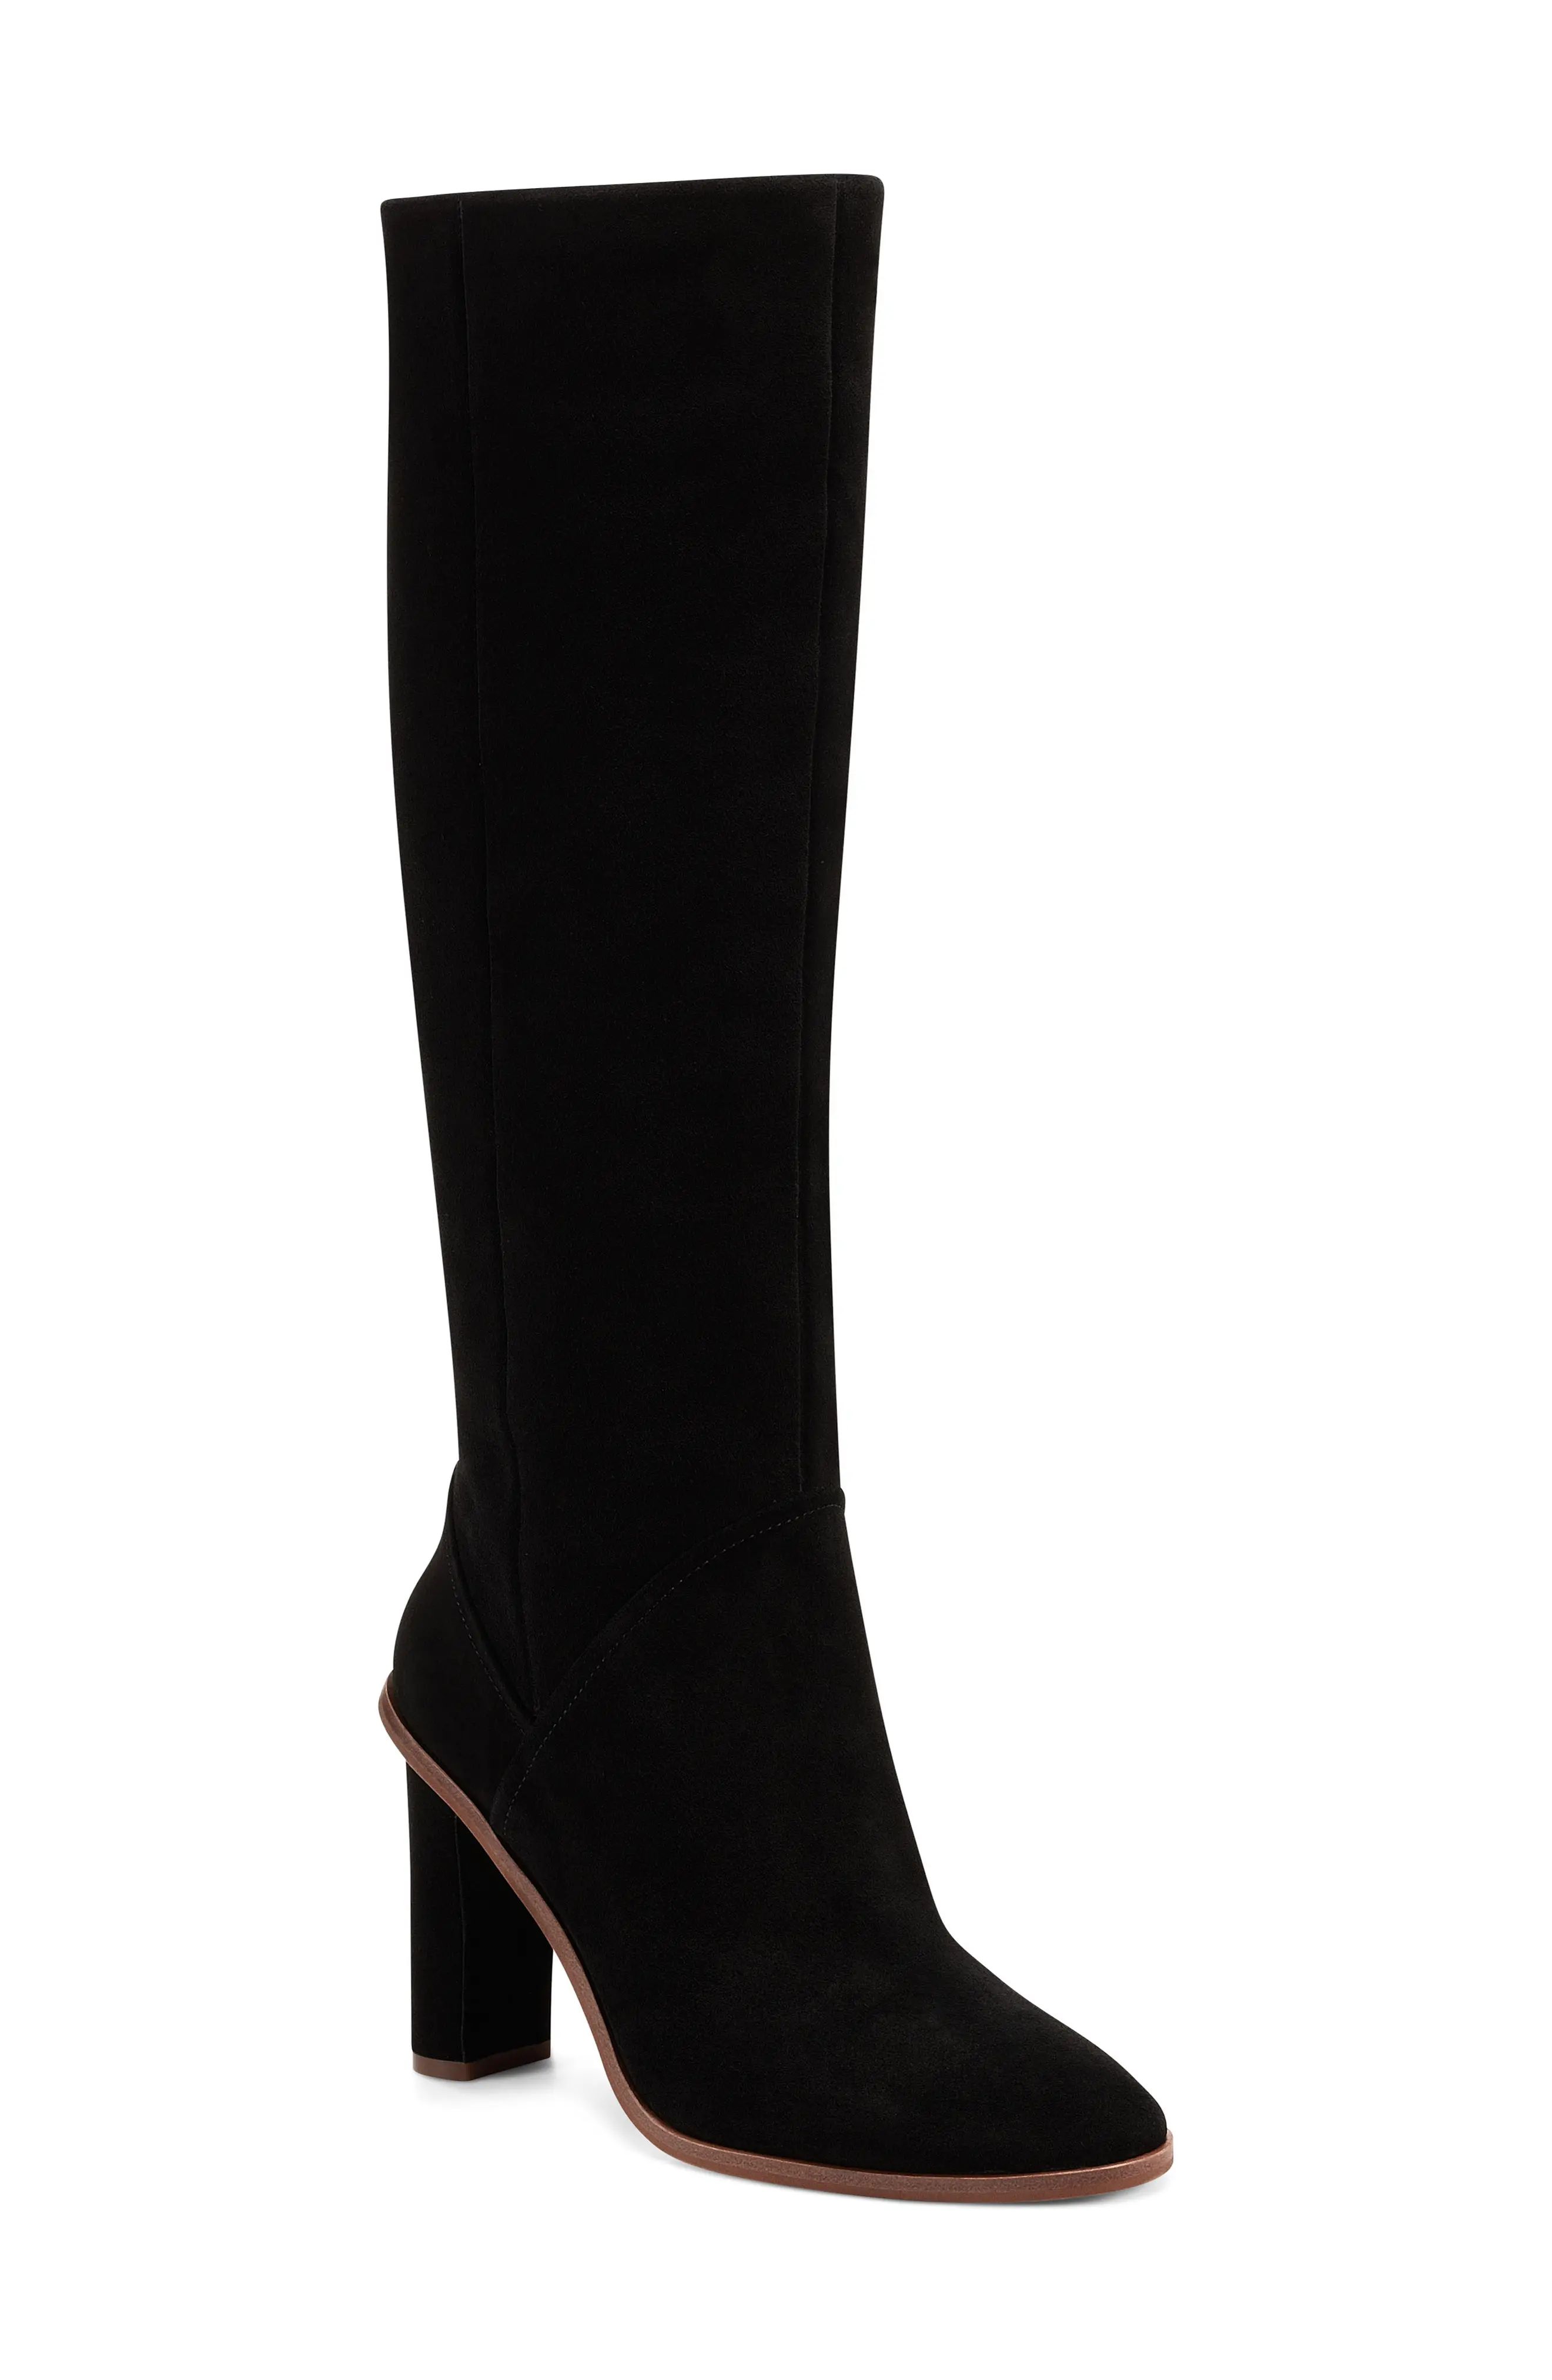 Vince Camuto Phranzie Knee High Boot, Size 6 in Black at Nordstrom | Nordstrom